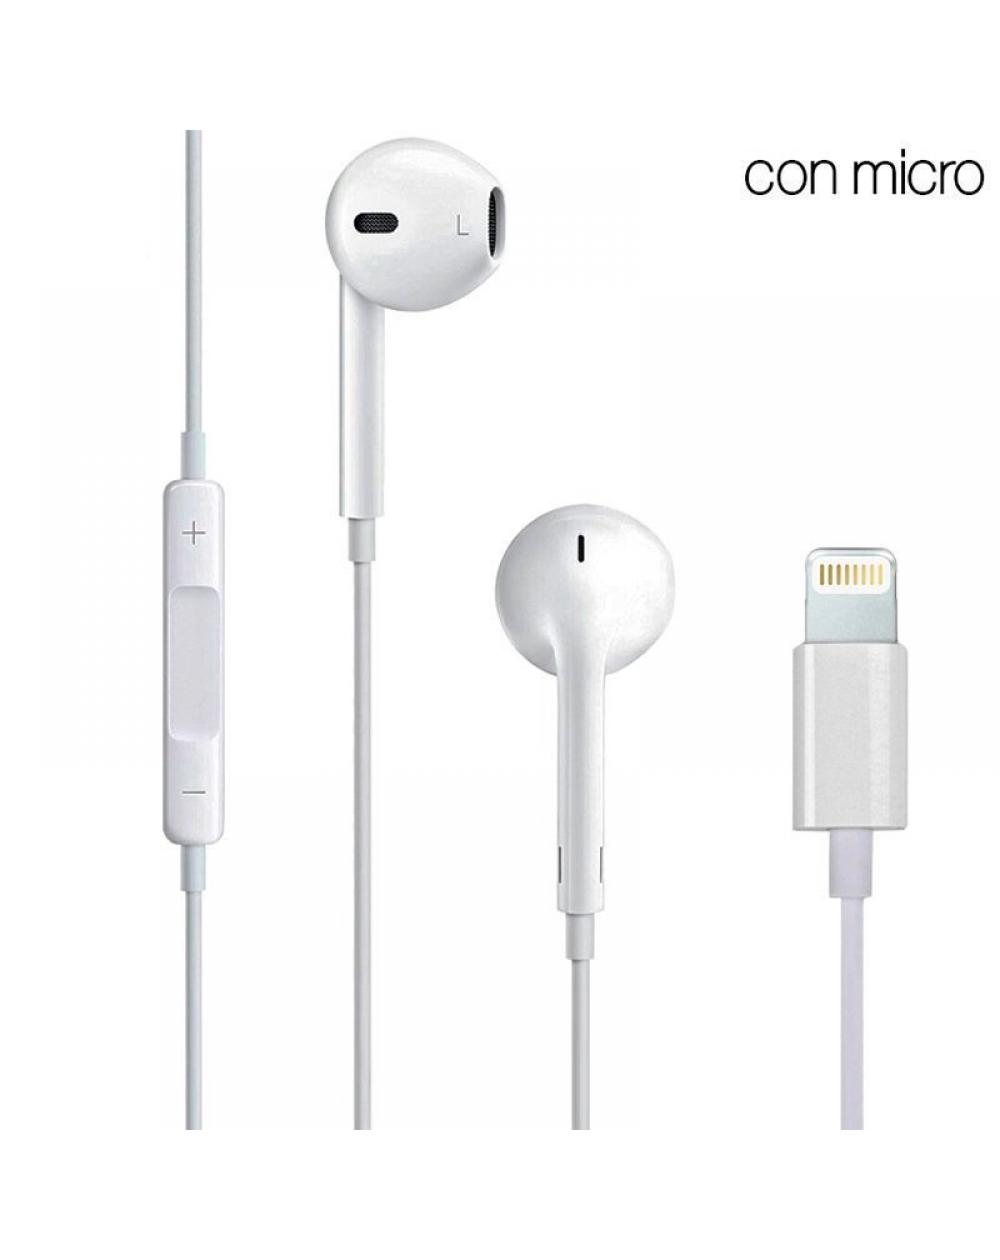 Auriculares Blancos COOL Stereo Con Micro para iPHONE 7 / 8 / X (Lightning Bluetooth) - Imagen 1